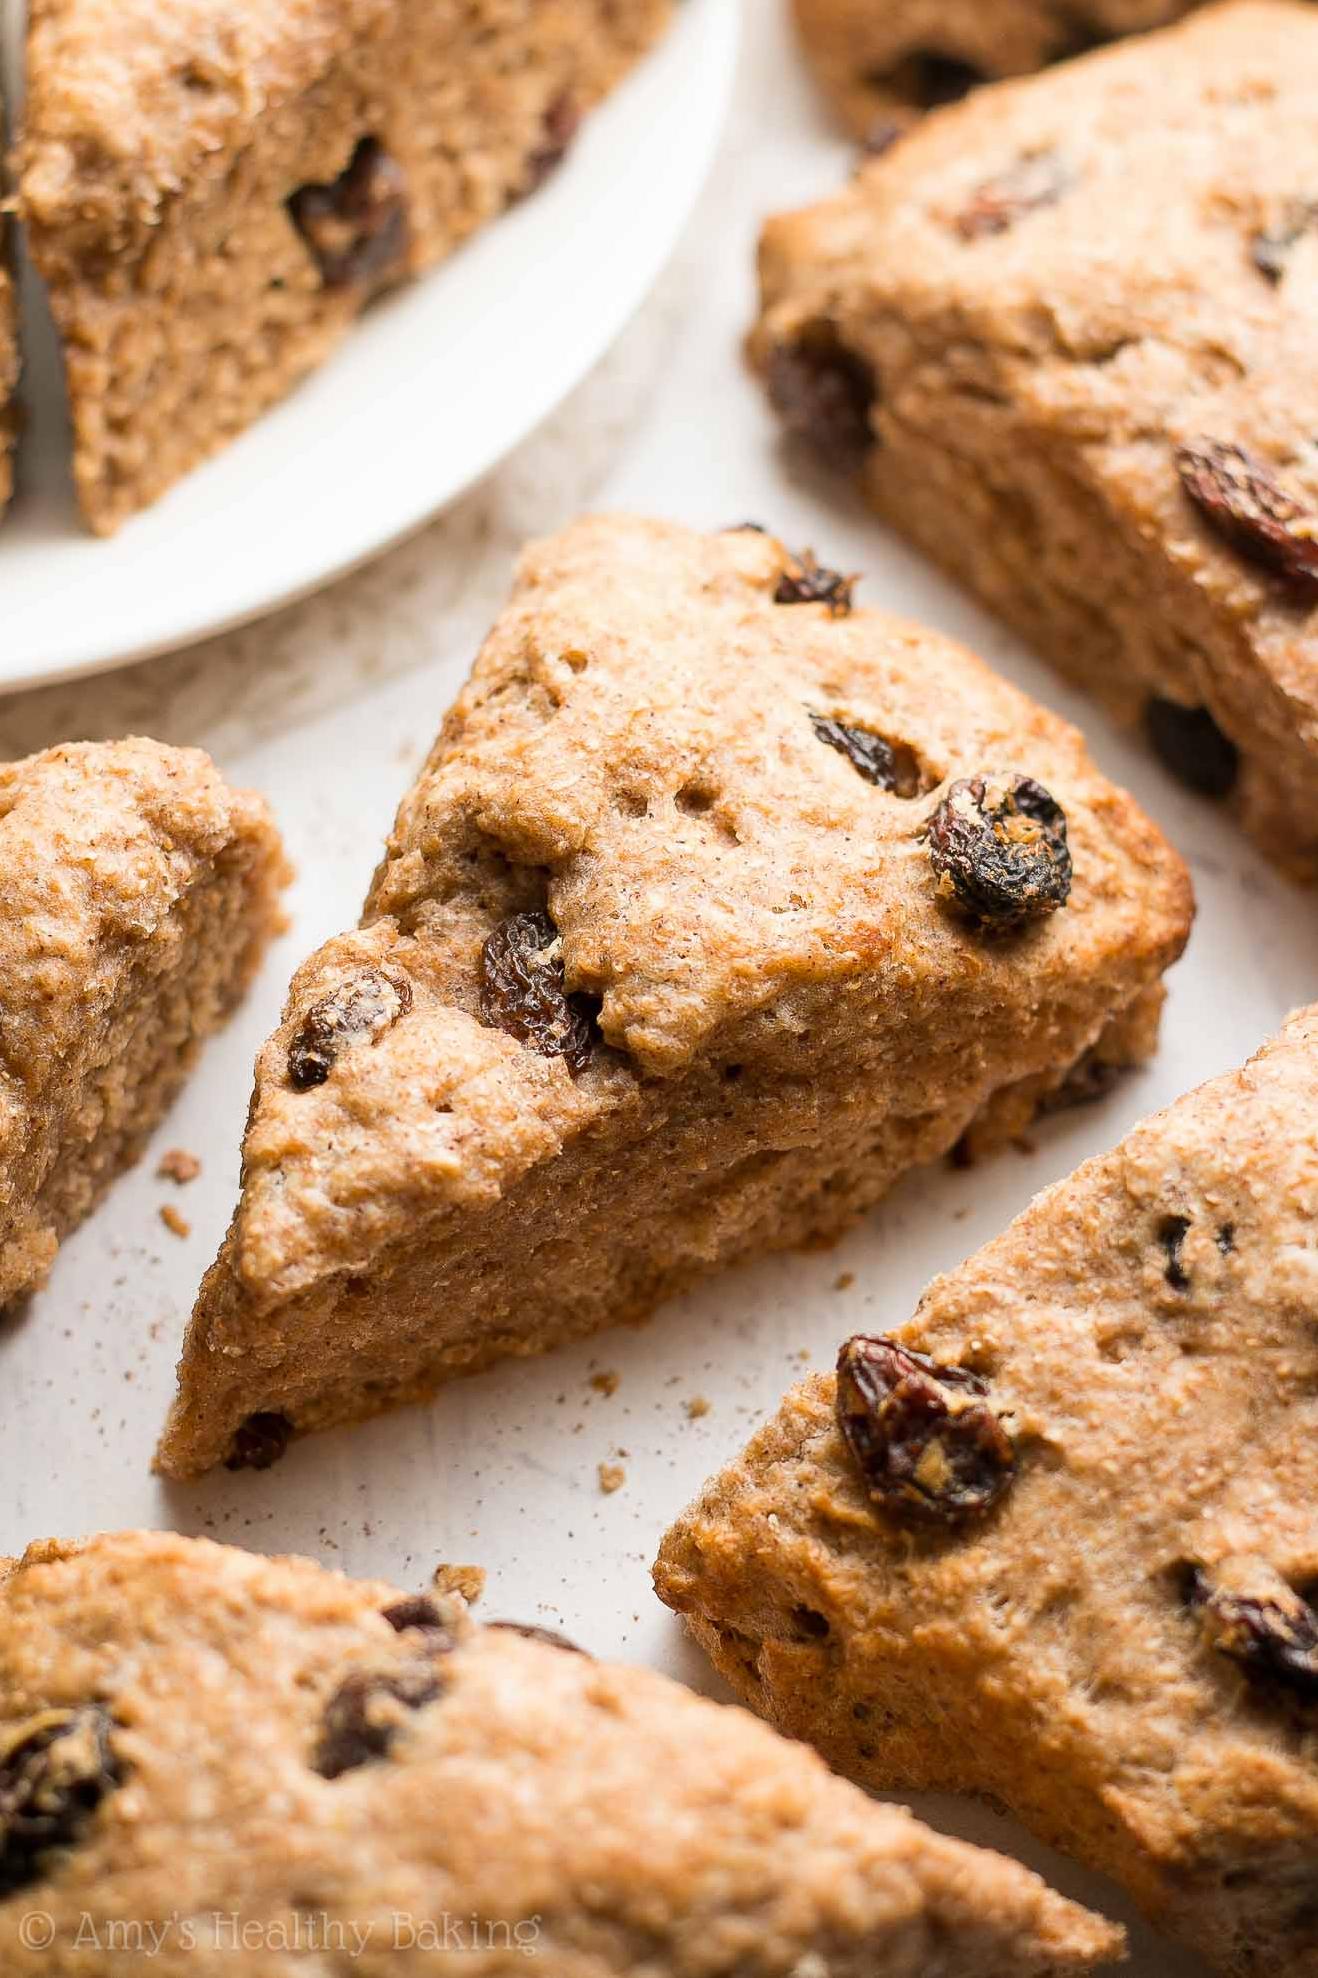  Upgrade your morning routine with these gluten-free scones